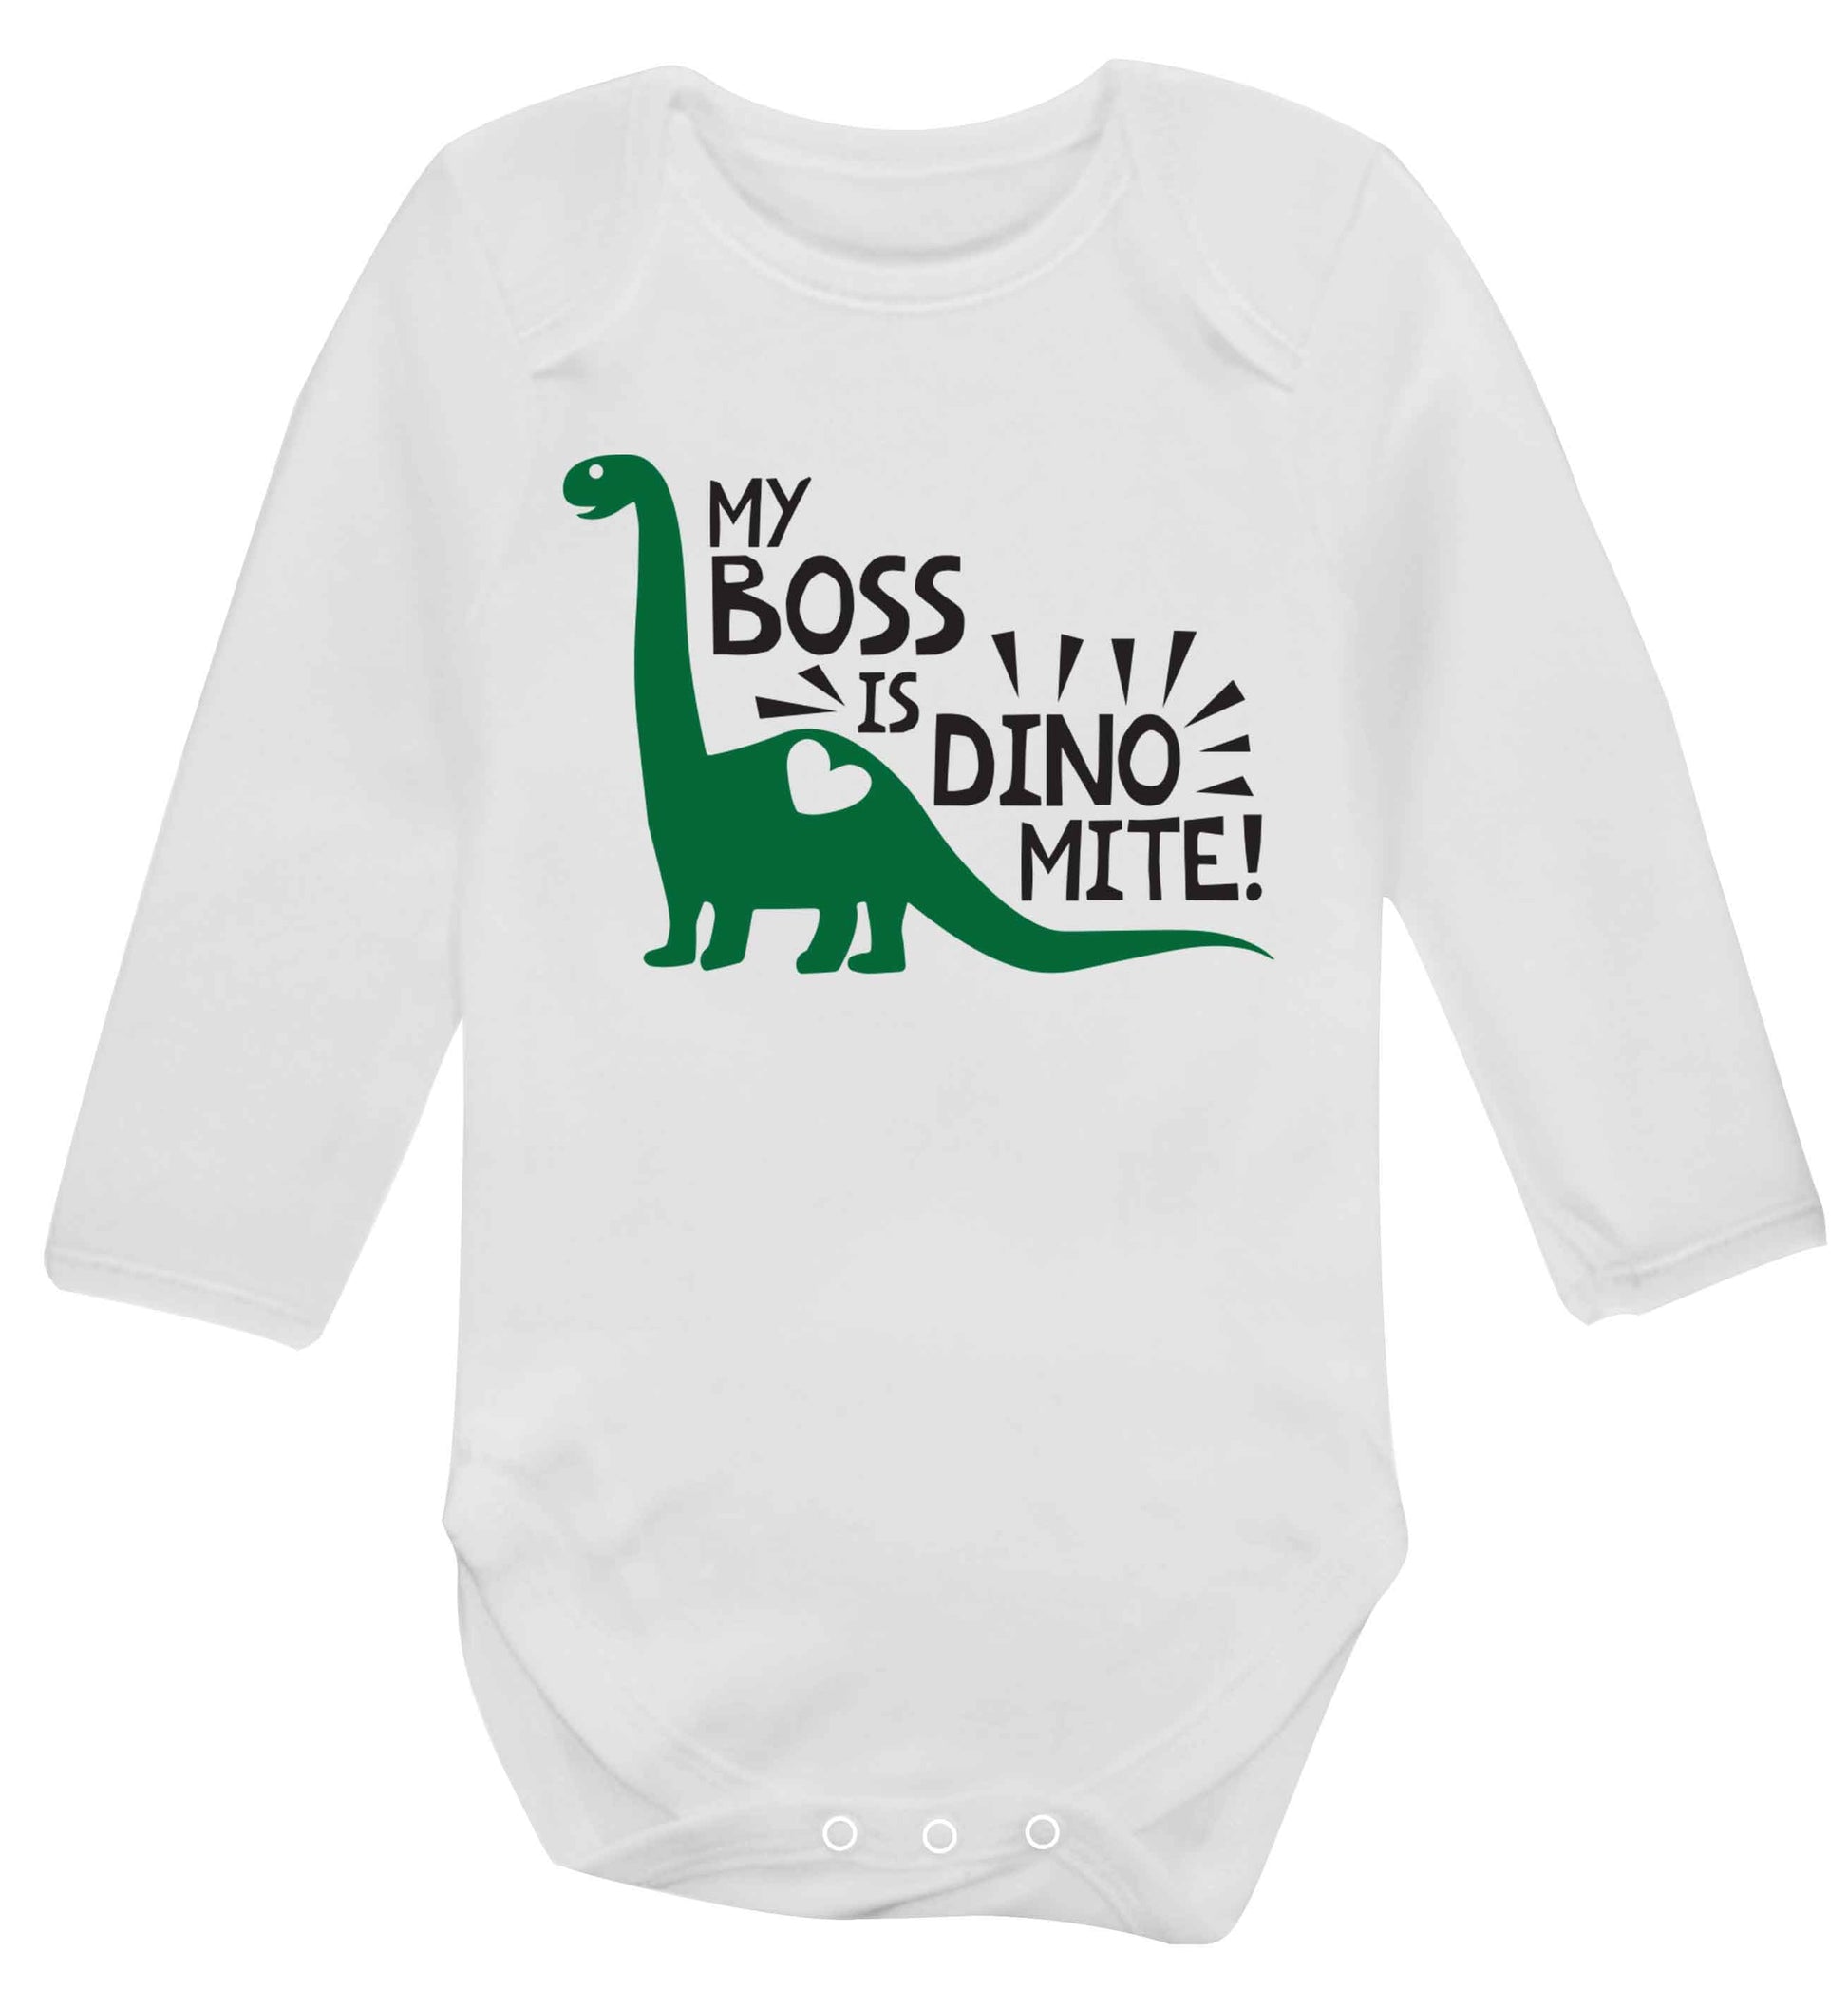 My boss is dinomite! Baby Vest long sleeved white 6-12 months